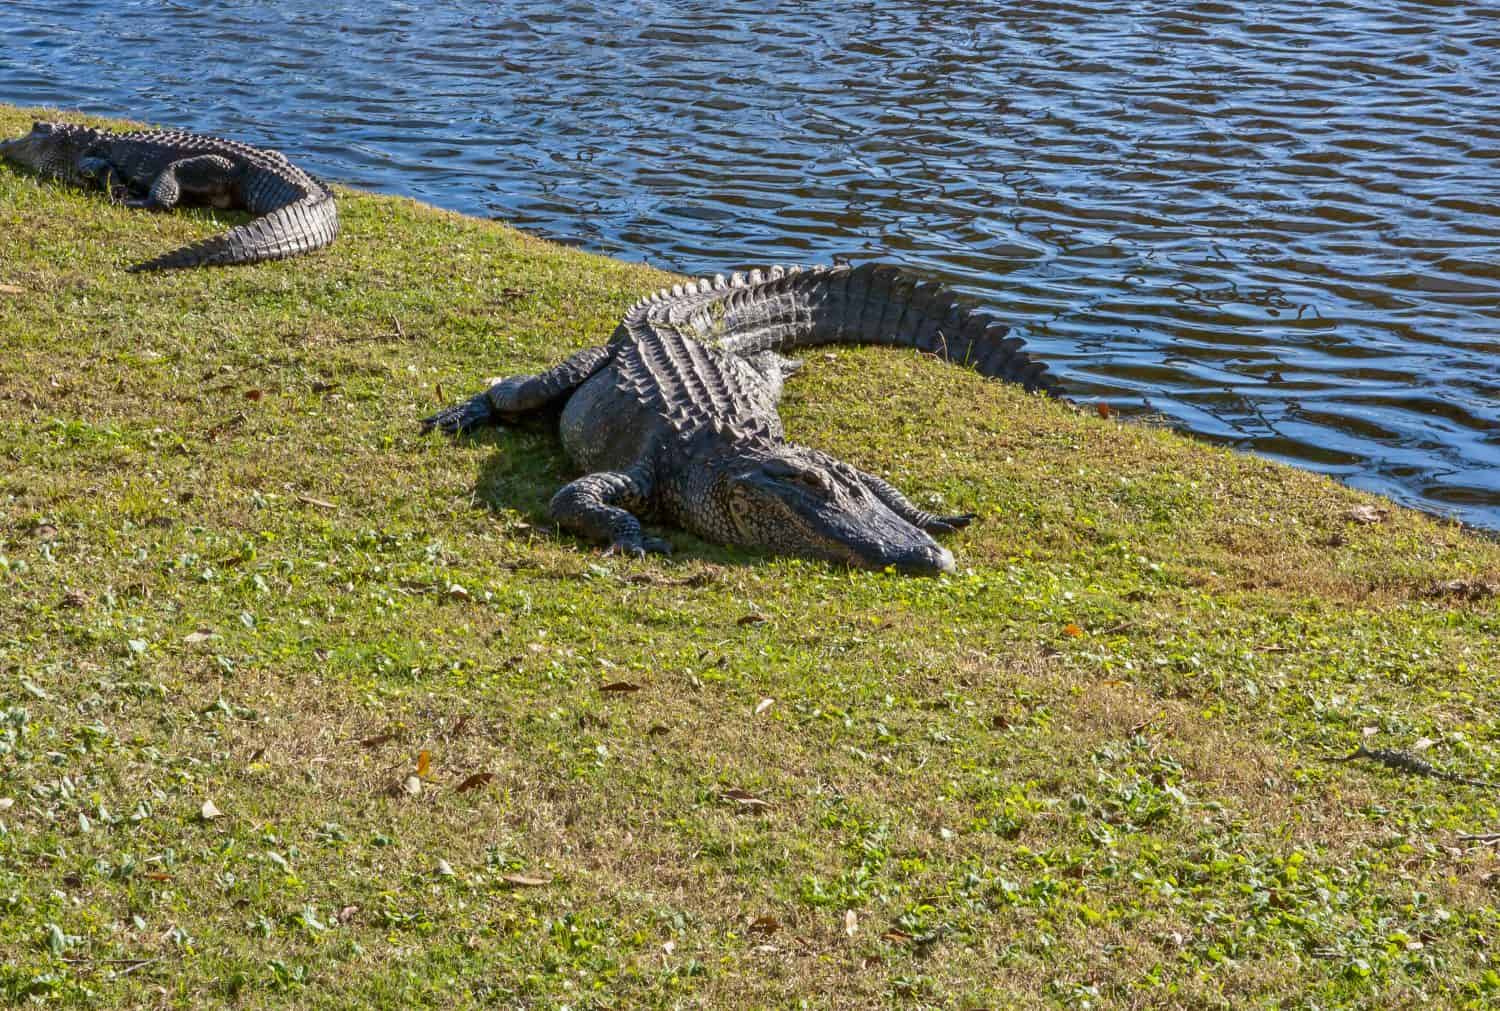 ALLIGATOR BY THE CLUB HOUSE